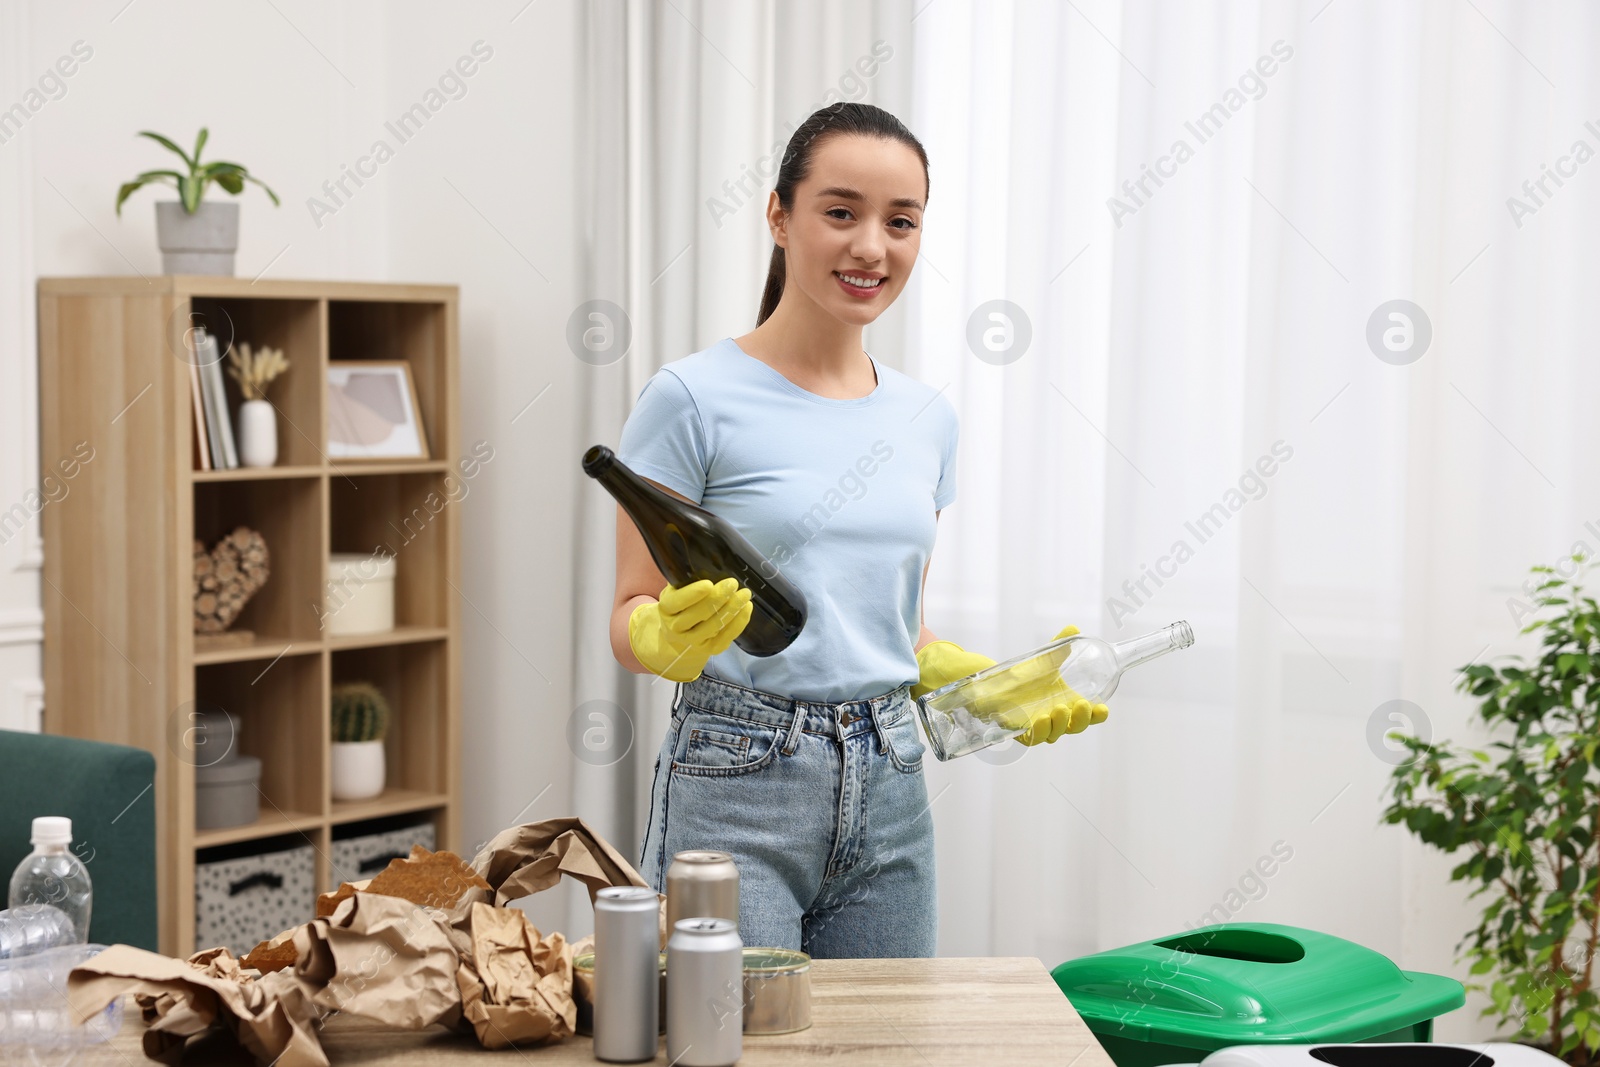 Photo of Garbage sorting. Smiling woman with glass bottles in room